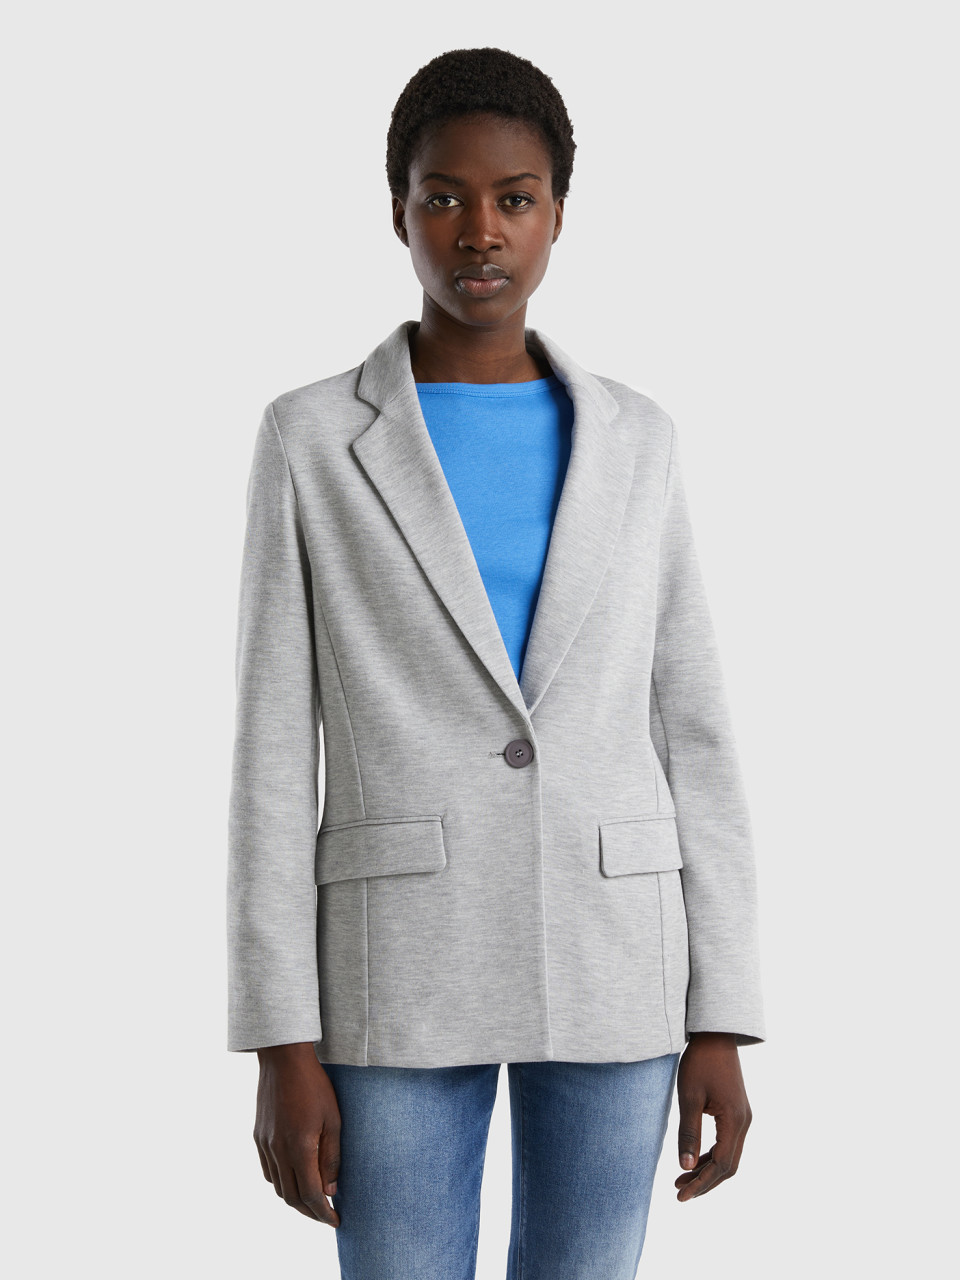 Benetton, Fitted Blazer With Pockets, Light Gray, Women